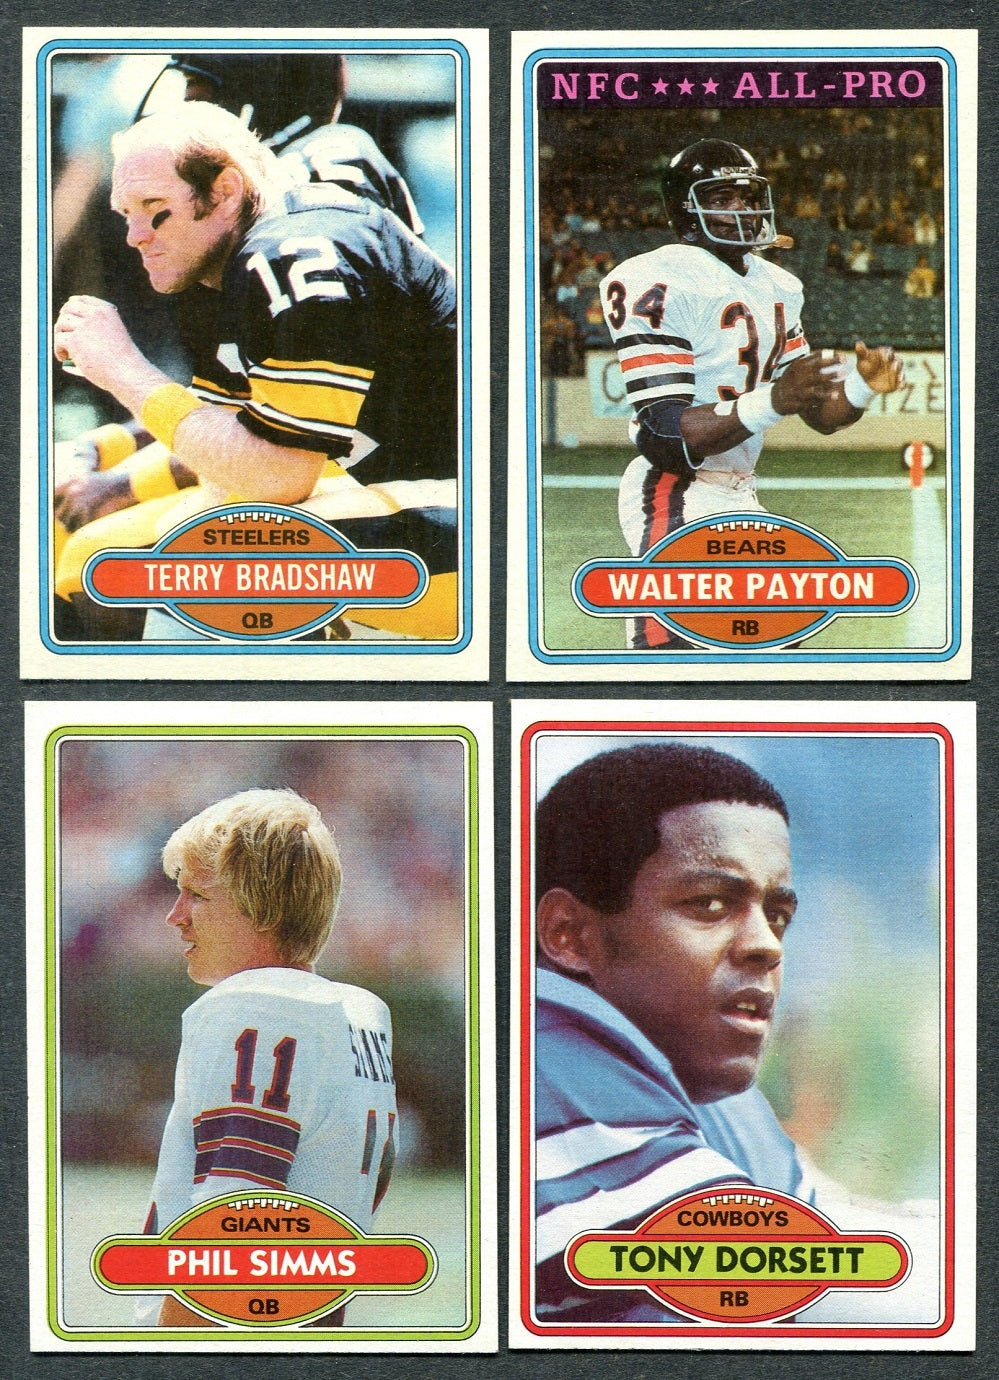 1980 Topps Football Complete Set EX/MT NM (528) (24-340)